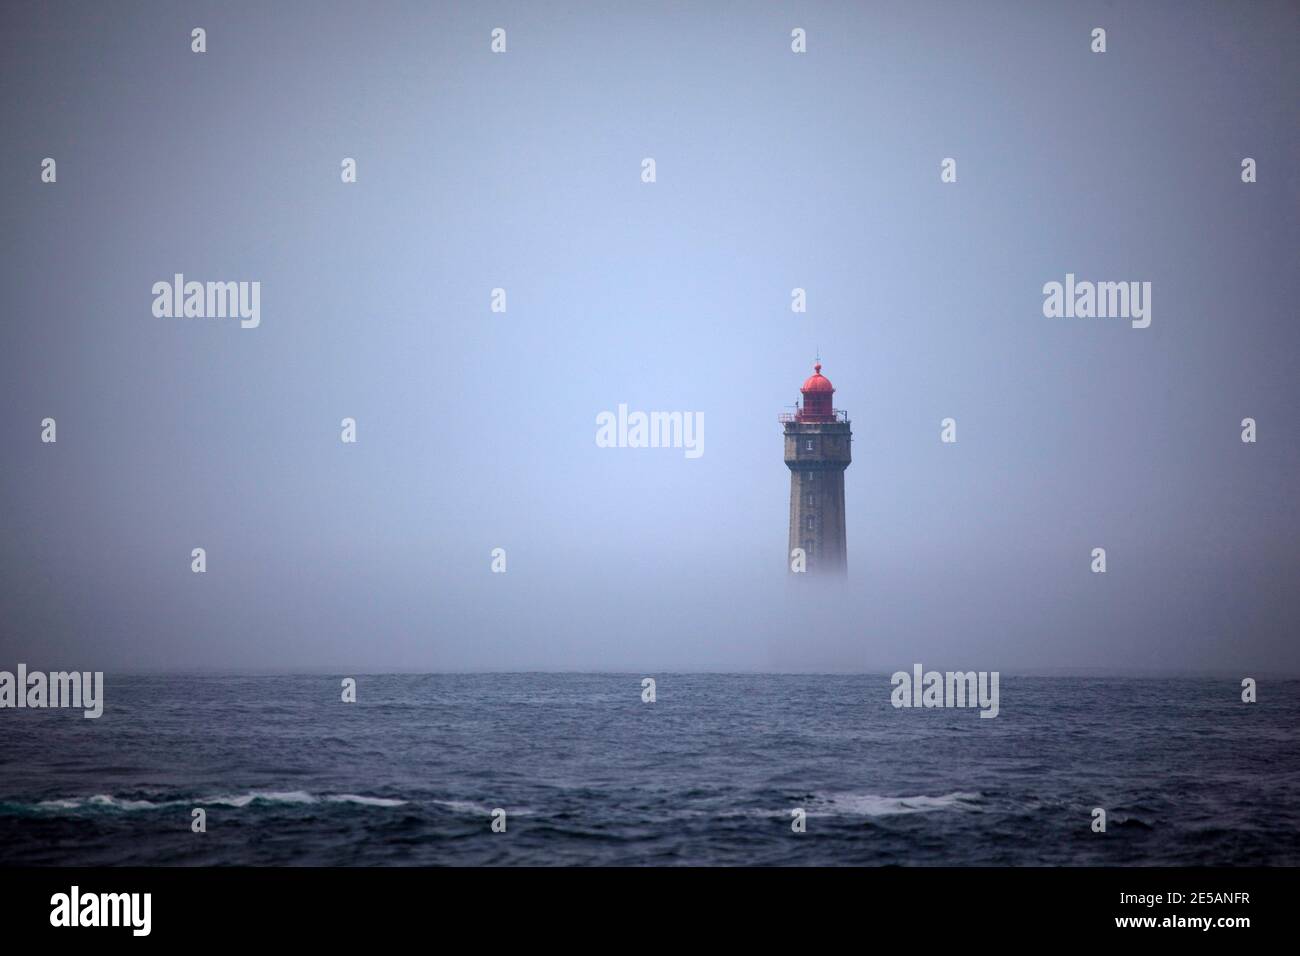 The dramatic La Jument lighthouse, shrounded in summer fog, off the coast of the Ile d'Ouessant, Brittany. The iconic 47-metre high lighthouse was bui Stock Photo